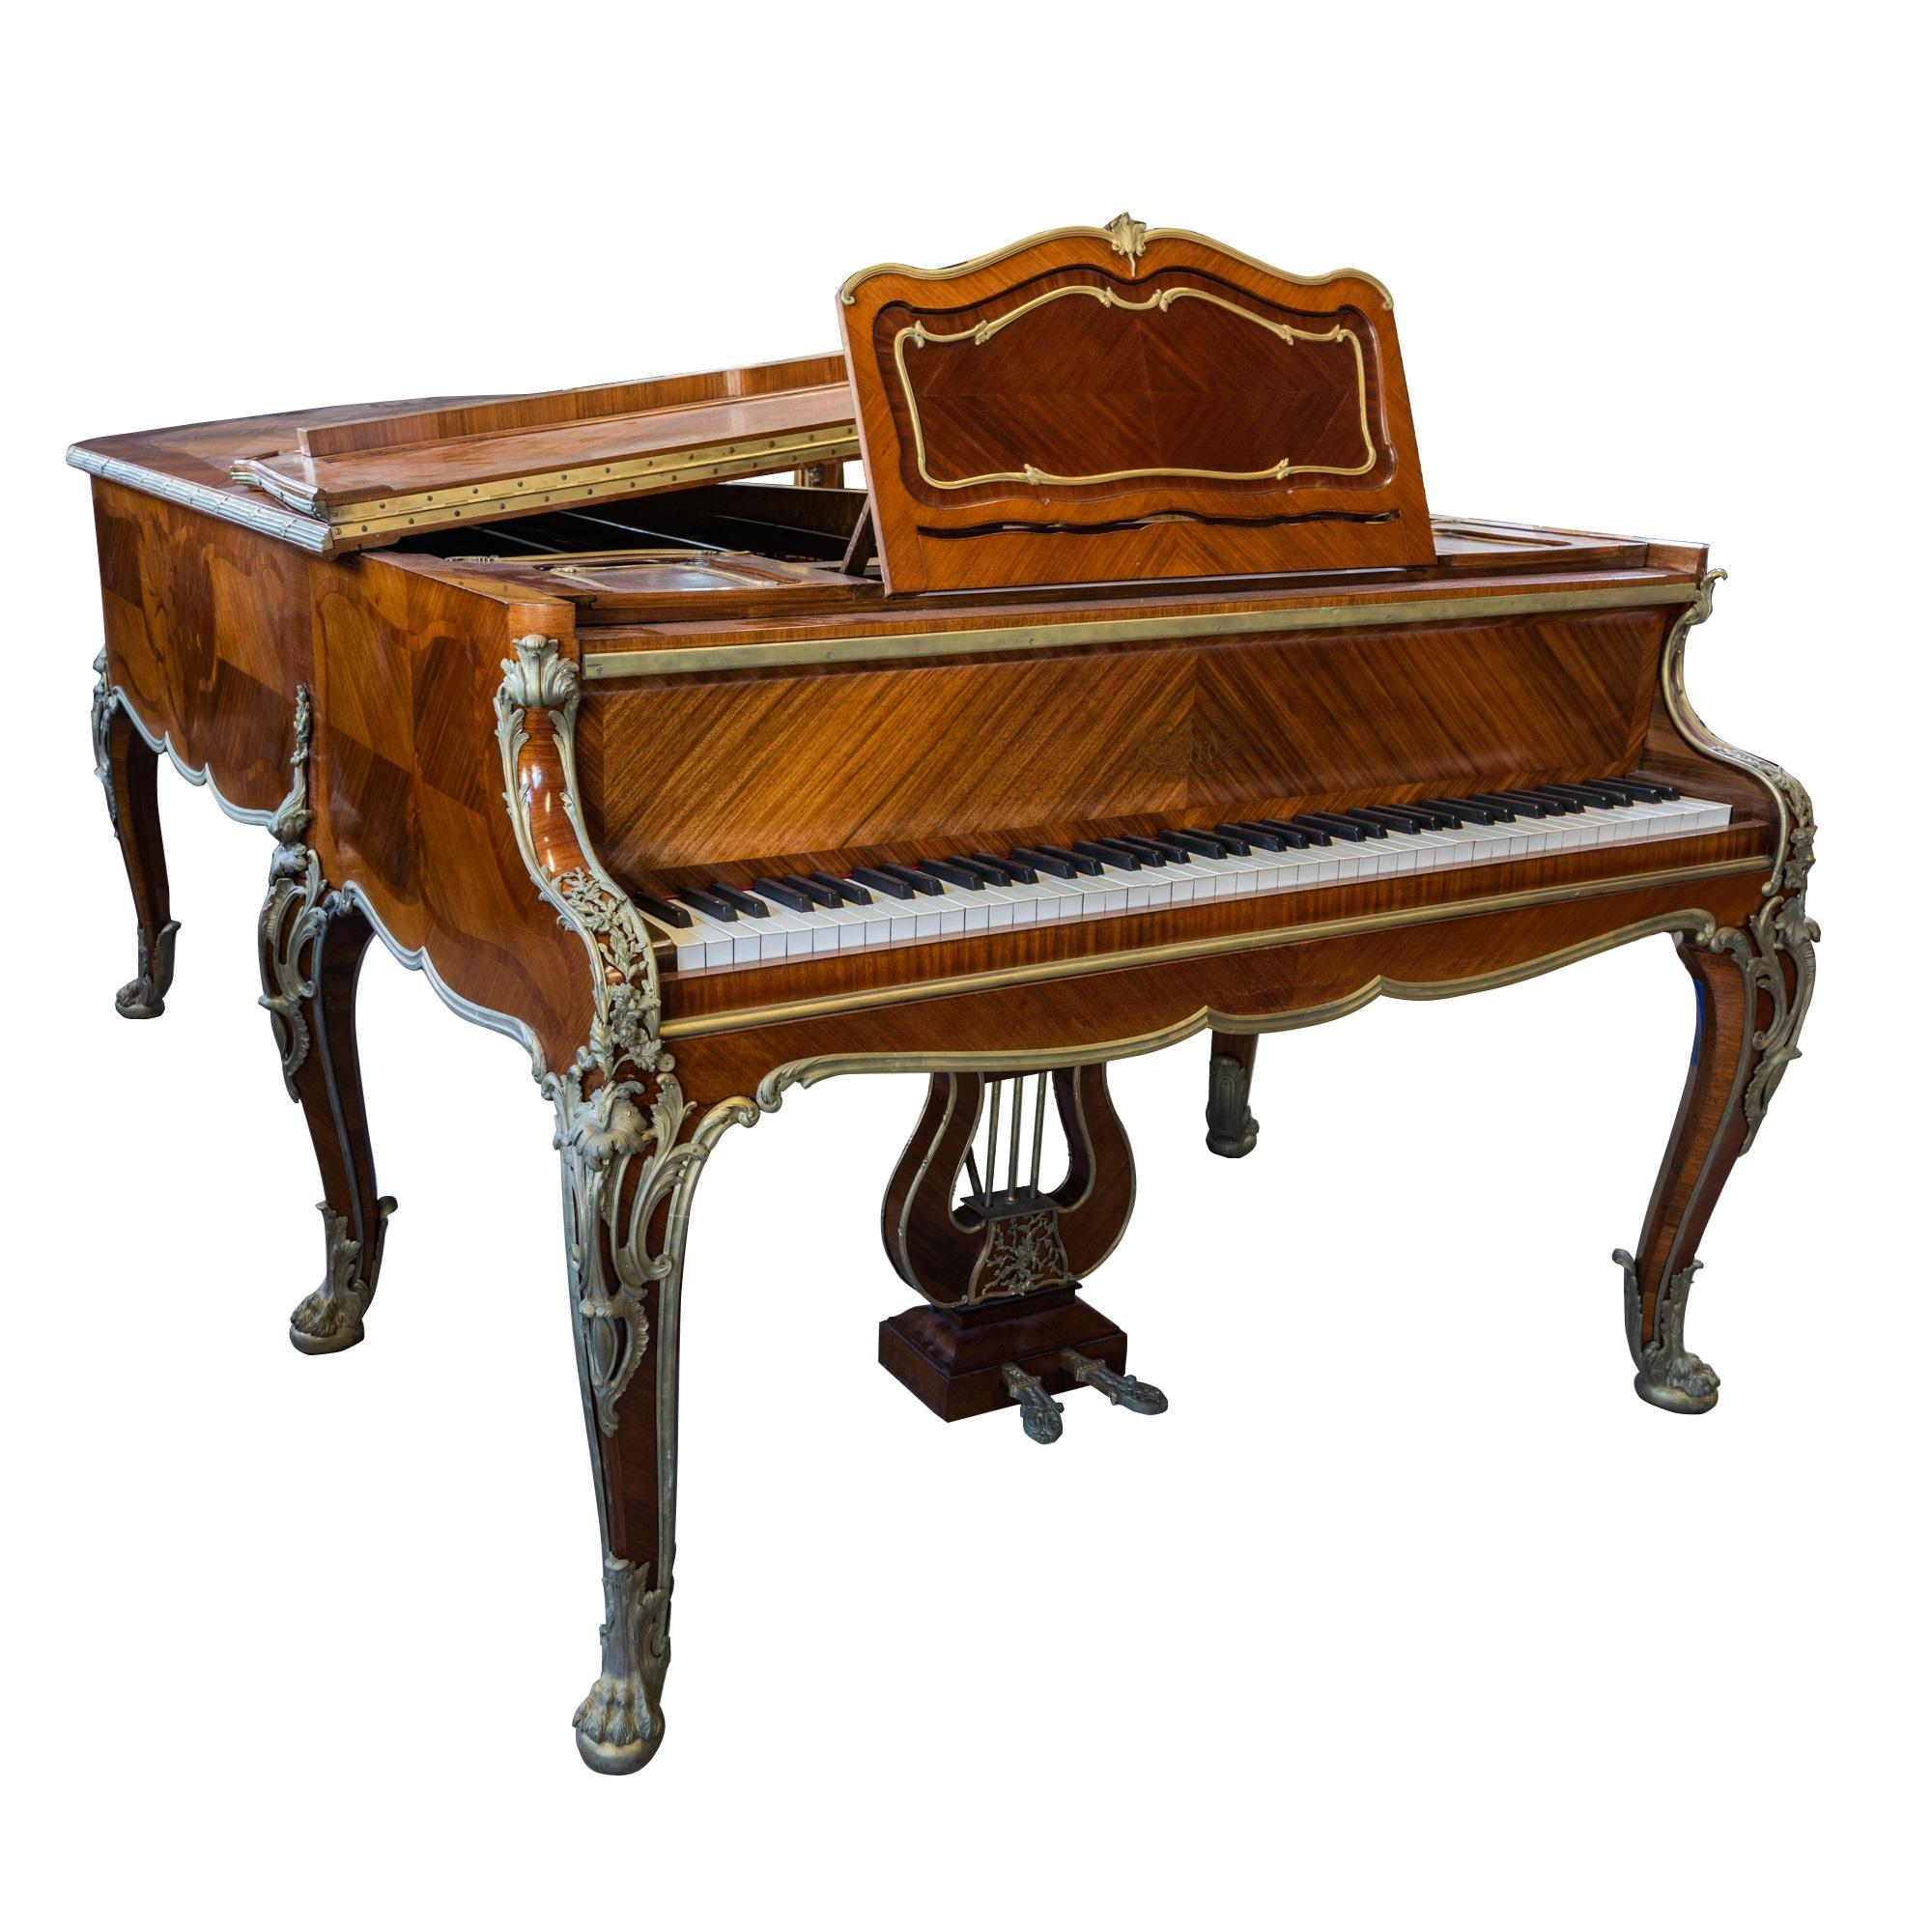 Francois Linke (1855-1946) 
A very fine Louis XV style gilt bronze mounted kingwood piano,late 19th century , signed Francois Linke, stamped Joseph-Emmanuel Zwiener, 
movement by Erard 
The quarter veneered case inlaid with cartouche panels